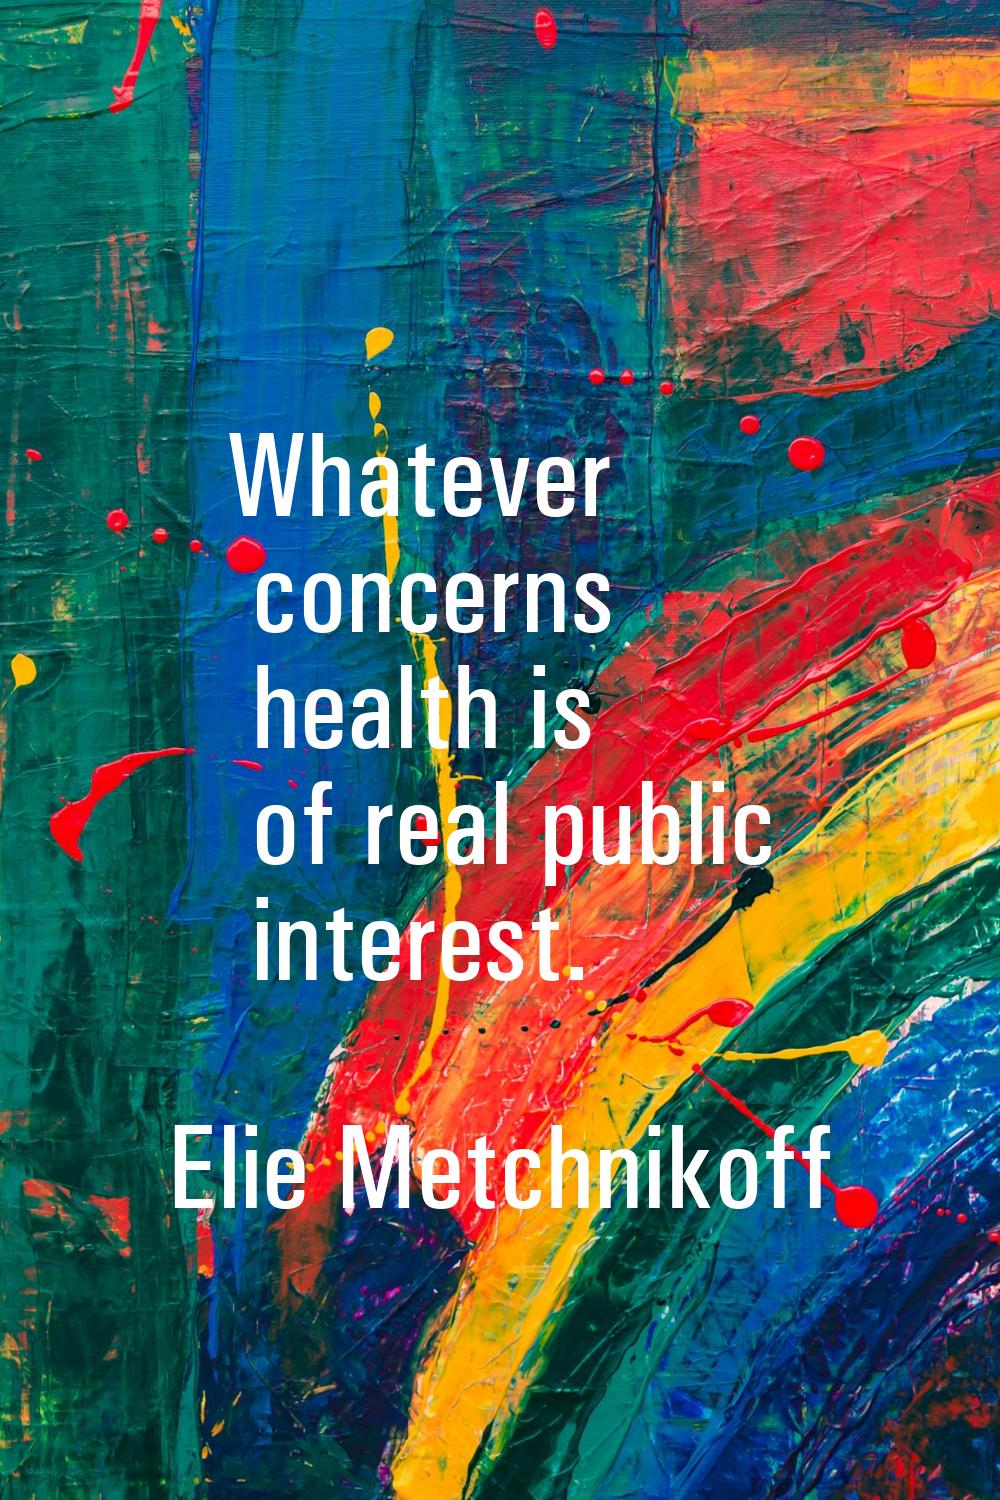 Whatever concerns health is of real public interest.